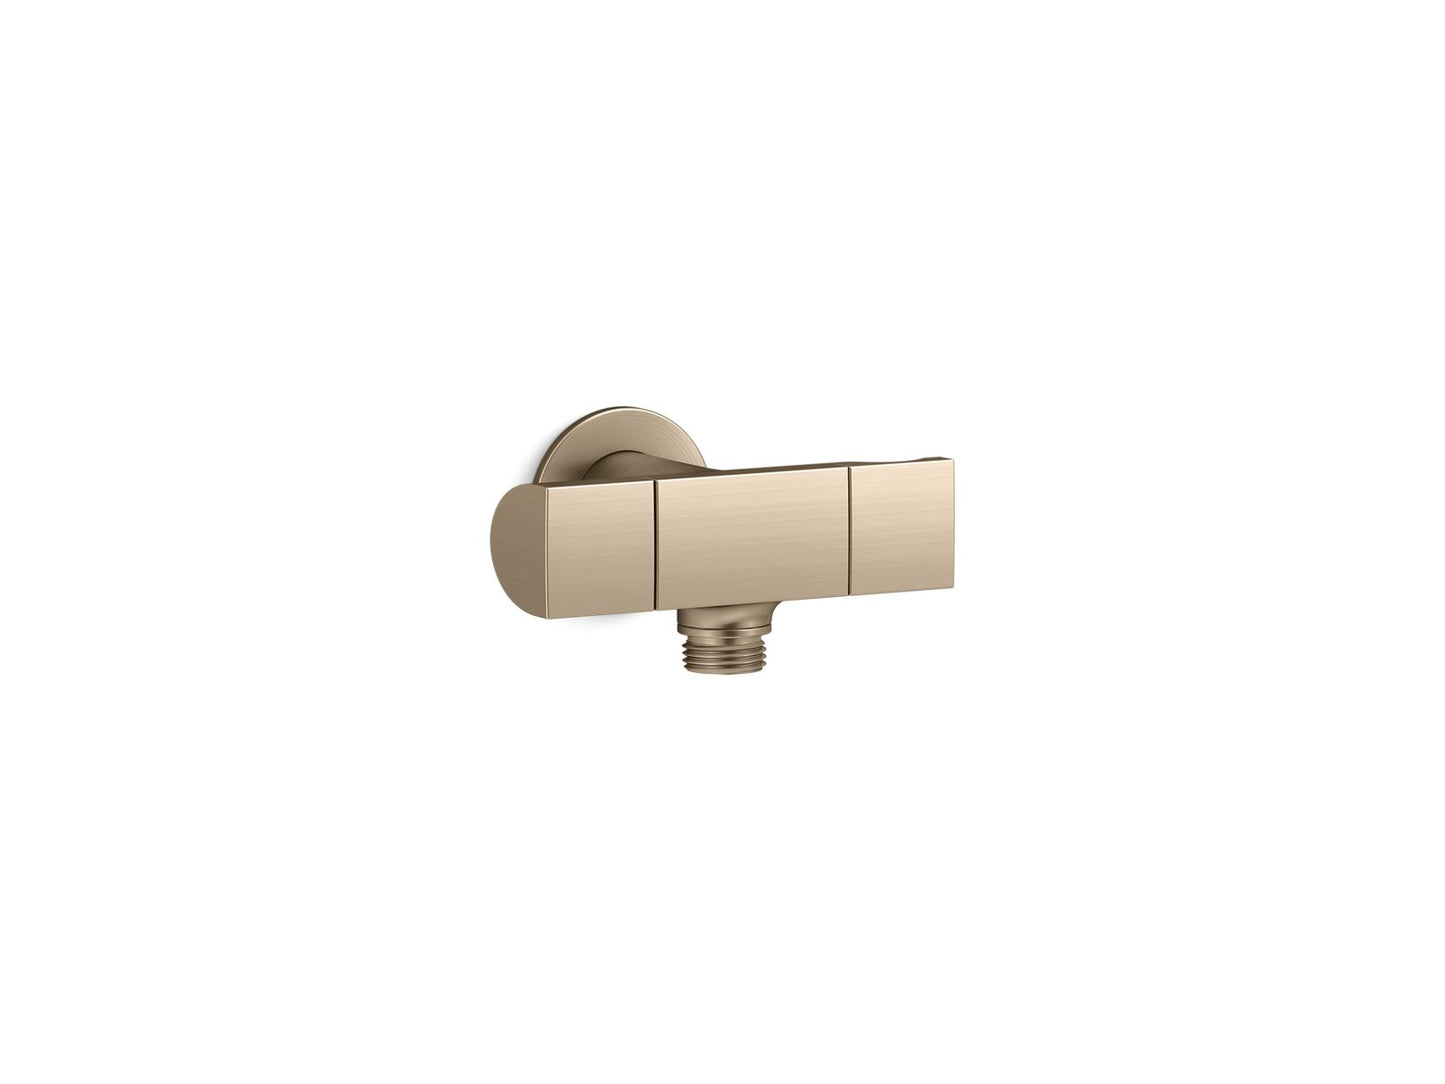 KOHLER K-98355-BV Exhale Wall-Mount Handshower Holder With Supply Elbow And Volume Control In Vibrant Brushed Bronze